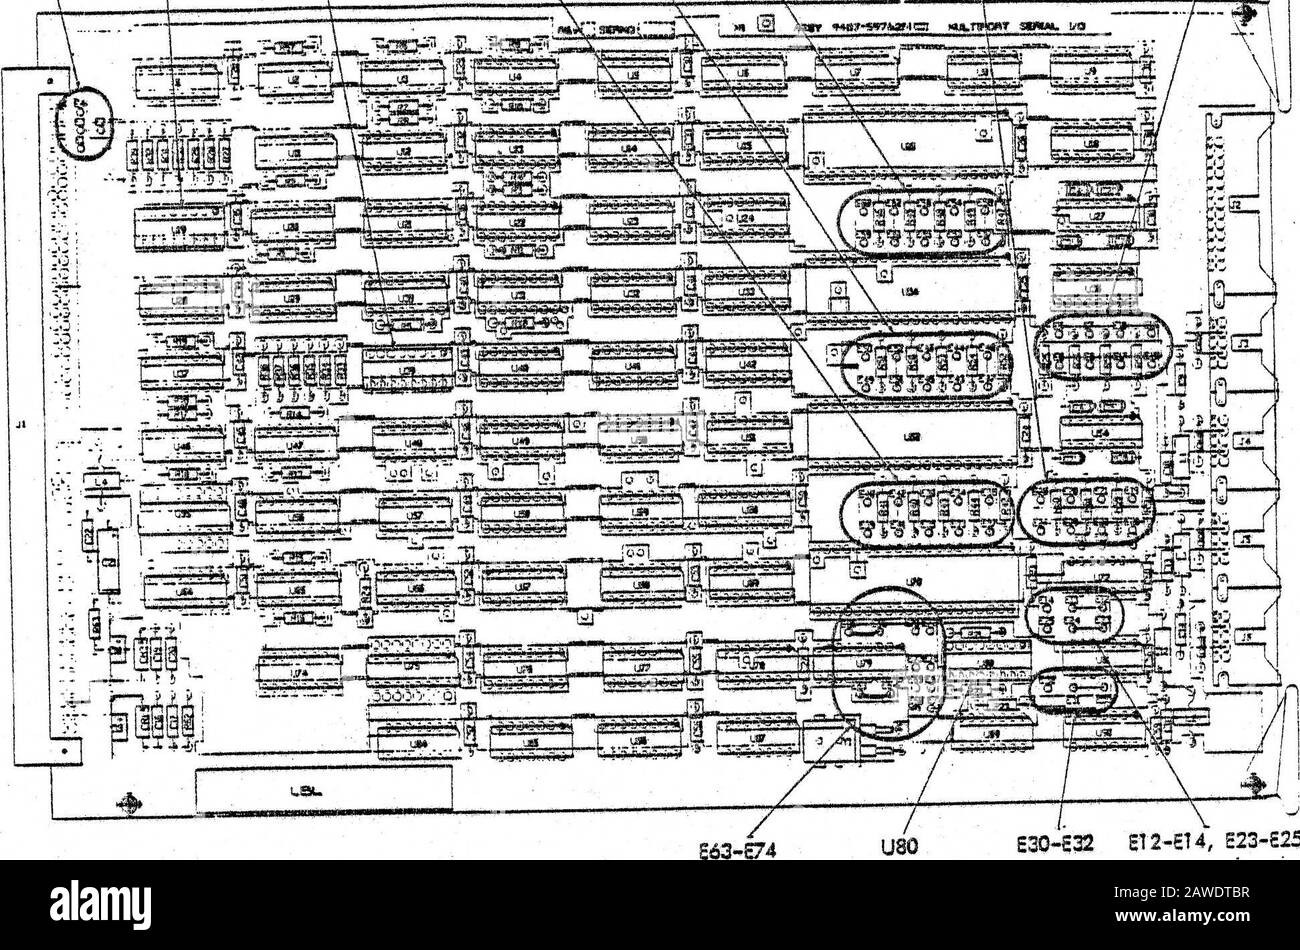 sandersAssociates :: graphic8 :: H-82-0176 Vistagraphic 3000 Graphic 8 Series 8000 Operation and Maintenance Manual Feb1983 . E33/I34 H41-S43 Figure 3-6. ROM and Status Card Jumper Locations E6-E8, E50-E27 H-S2-004*038 3-29 3 6.4 MULTIPORT SERIAL INTERFACE. This card (figure 3-7) containsbothjumper terminals and DIP switches that allow reconfiguration of 14different parameters, as described in table 3-13. E33-S42 E43-ES2 E53-E62 E9-SM, E19-E22, E26-E29 E5-E3,.E15-E18    A ^ L  L— n EI-E4 U19 U39. E3Q-S32 ET2-E14, E23-E25 1+32-0044-037 Figure 3-7. Multiport Serial Interface Switch and Jumper Stock Photo